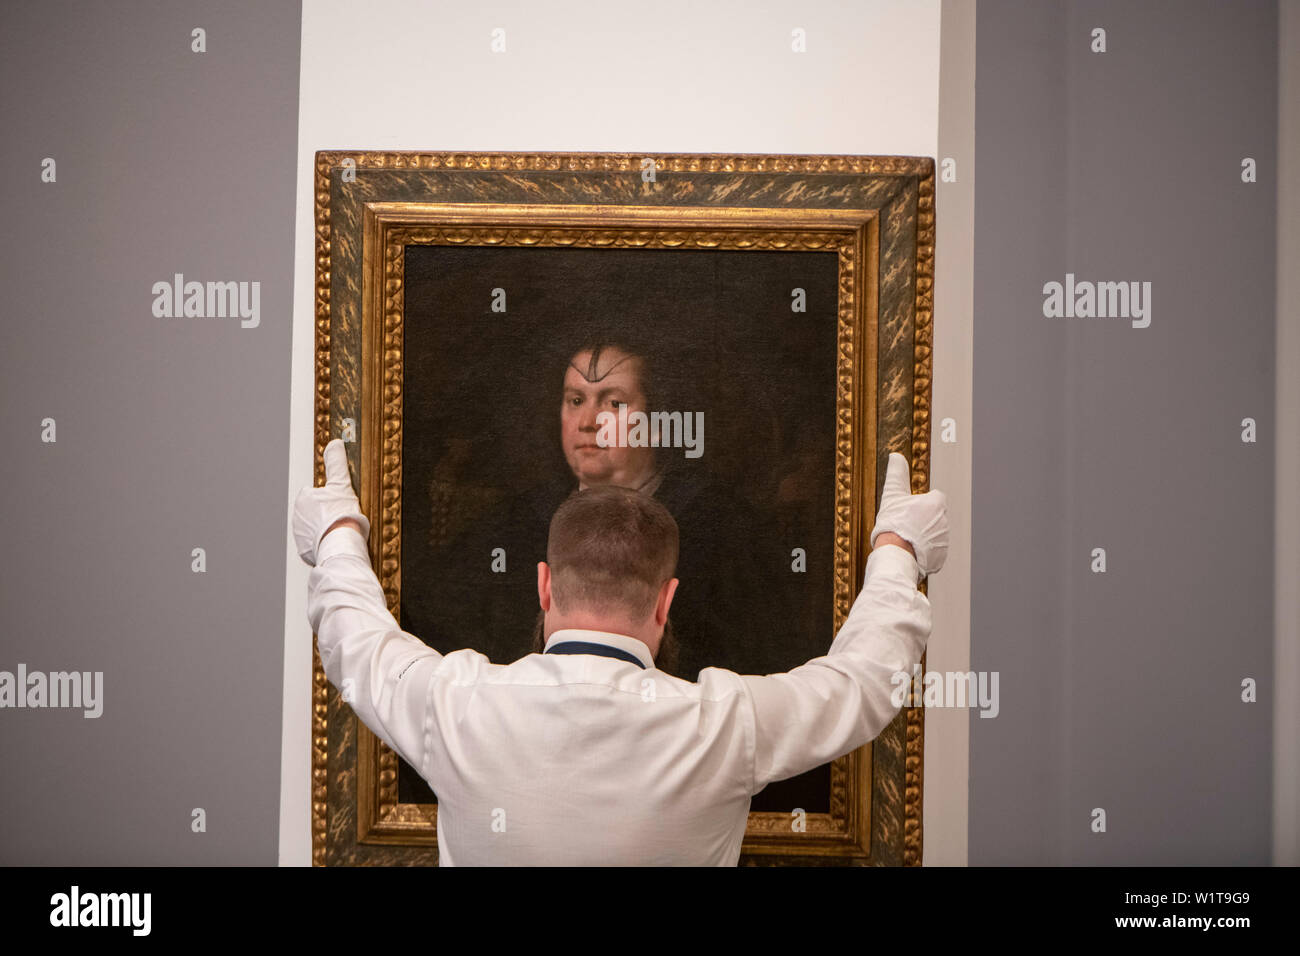 Sotheby’s, London, UK. 3rd July 2019. The summer Old Masters Evening sale offers paintings from the 14th - 19th century by many of the most important painters of Western art. Highlights include a masterpiece by each of Britain’s greatest landscape painters - Turner, Constable and Gainsborough - and extraordinary works from the Baroque by Ribera and the exceptionally rare Johann Liss. Image: Diego Rodríguez de Silva Y Velázquez, Portrait of Olimpia Maidalchini Pamphilj (1591-1657), sells for £2,495,000. Credit: Malcolm Park/Alamy Live News. Stock Photo